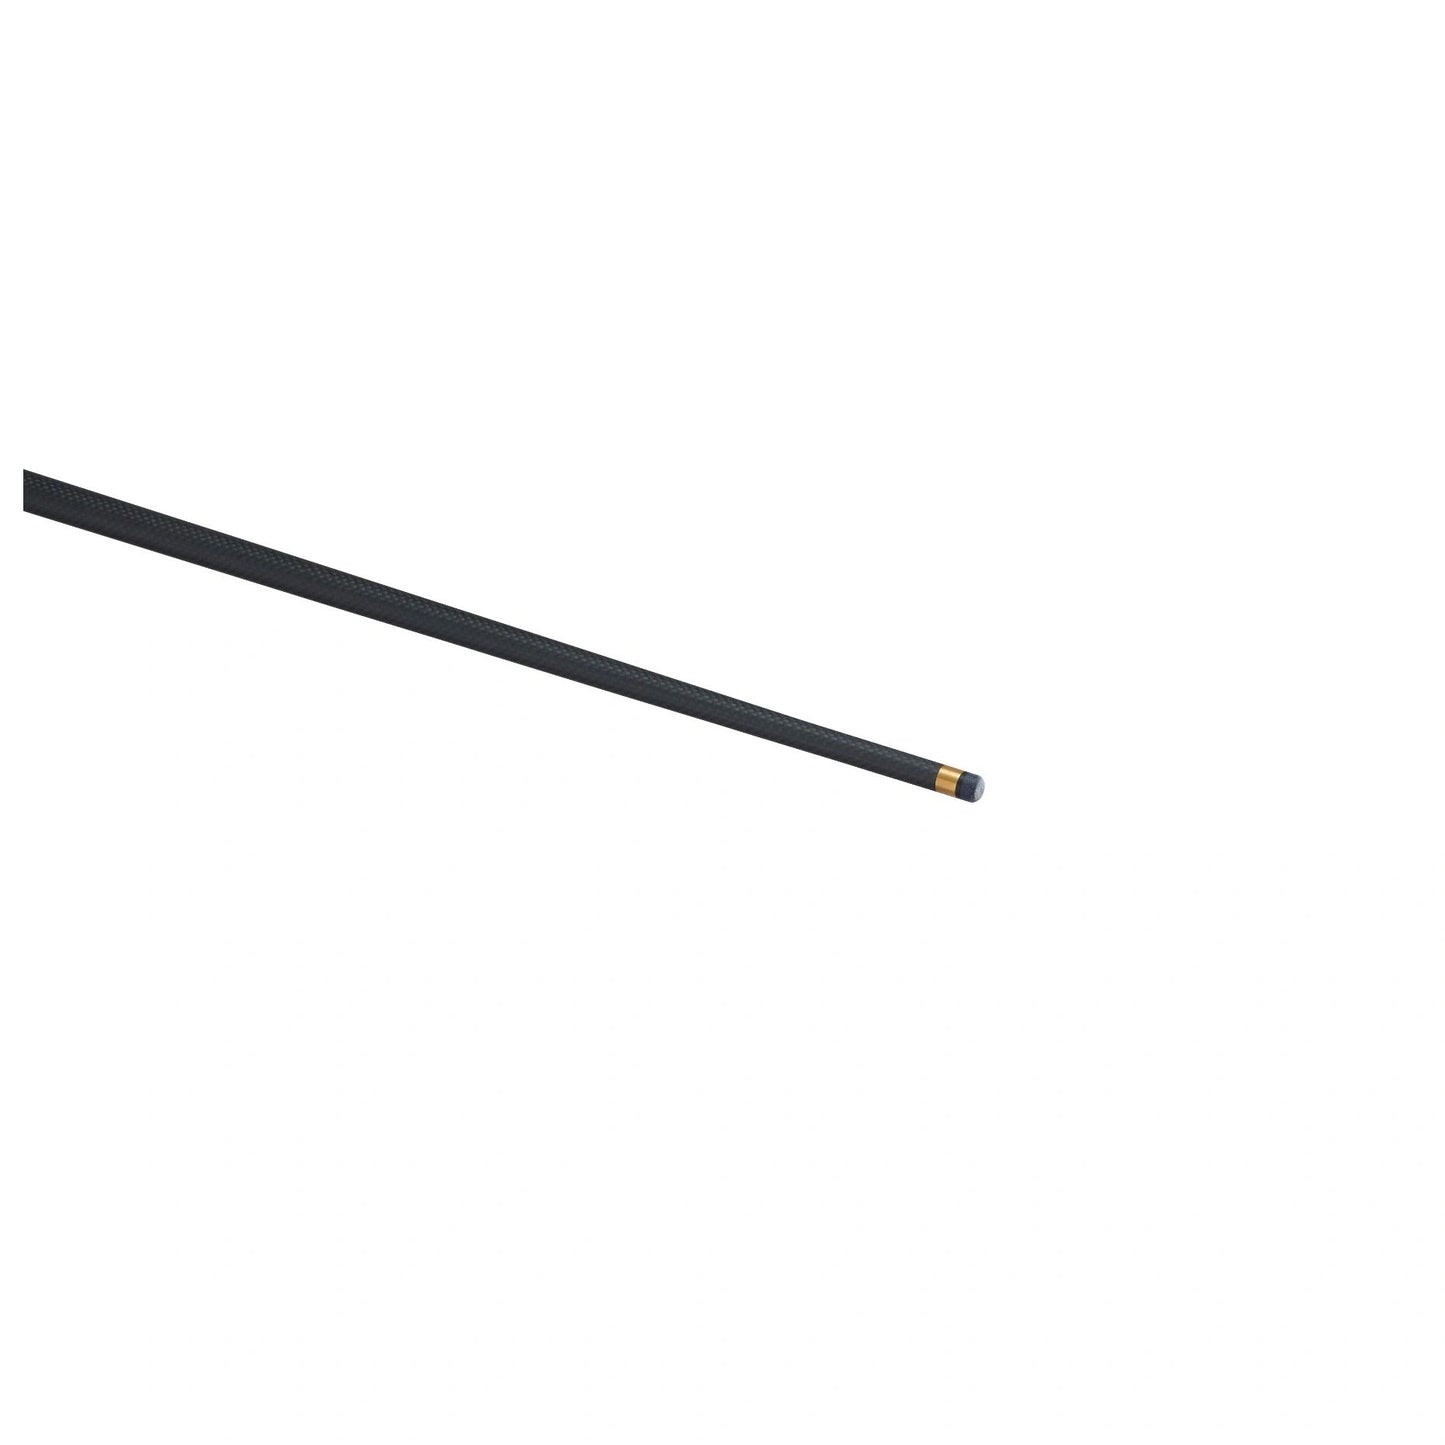 Powerglide Aramid Black Graphite 2 Piece 57" Snooker Cue with 10mm Tip